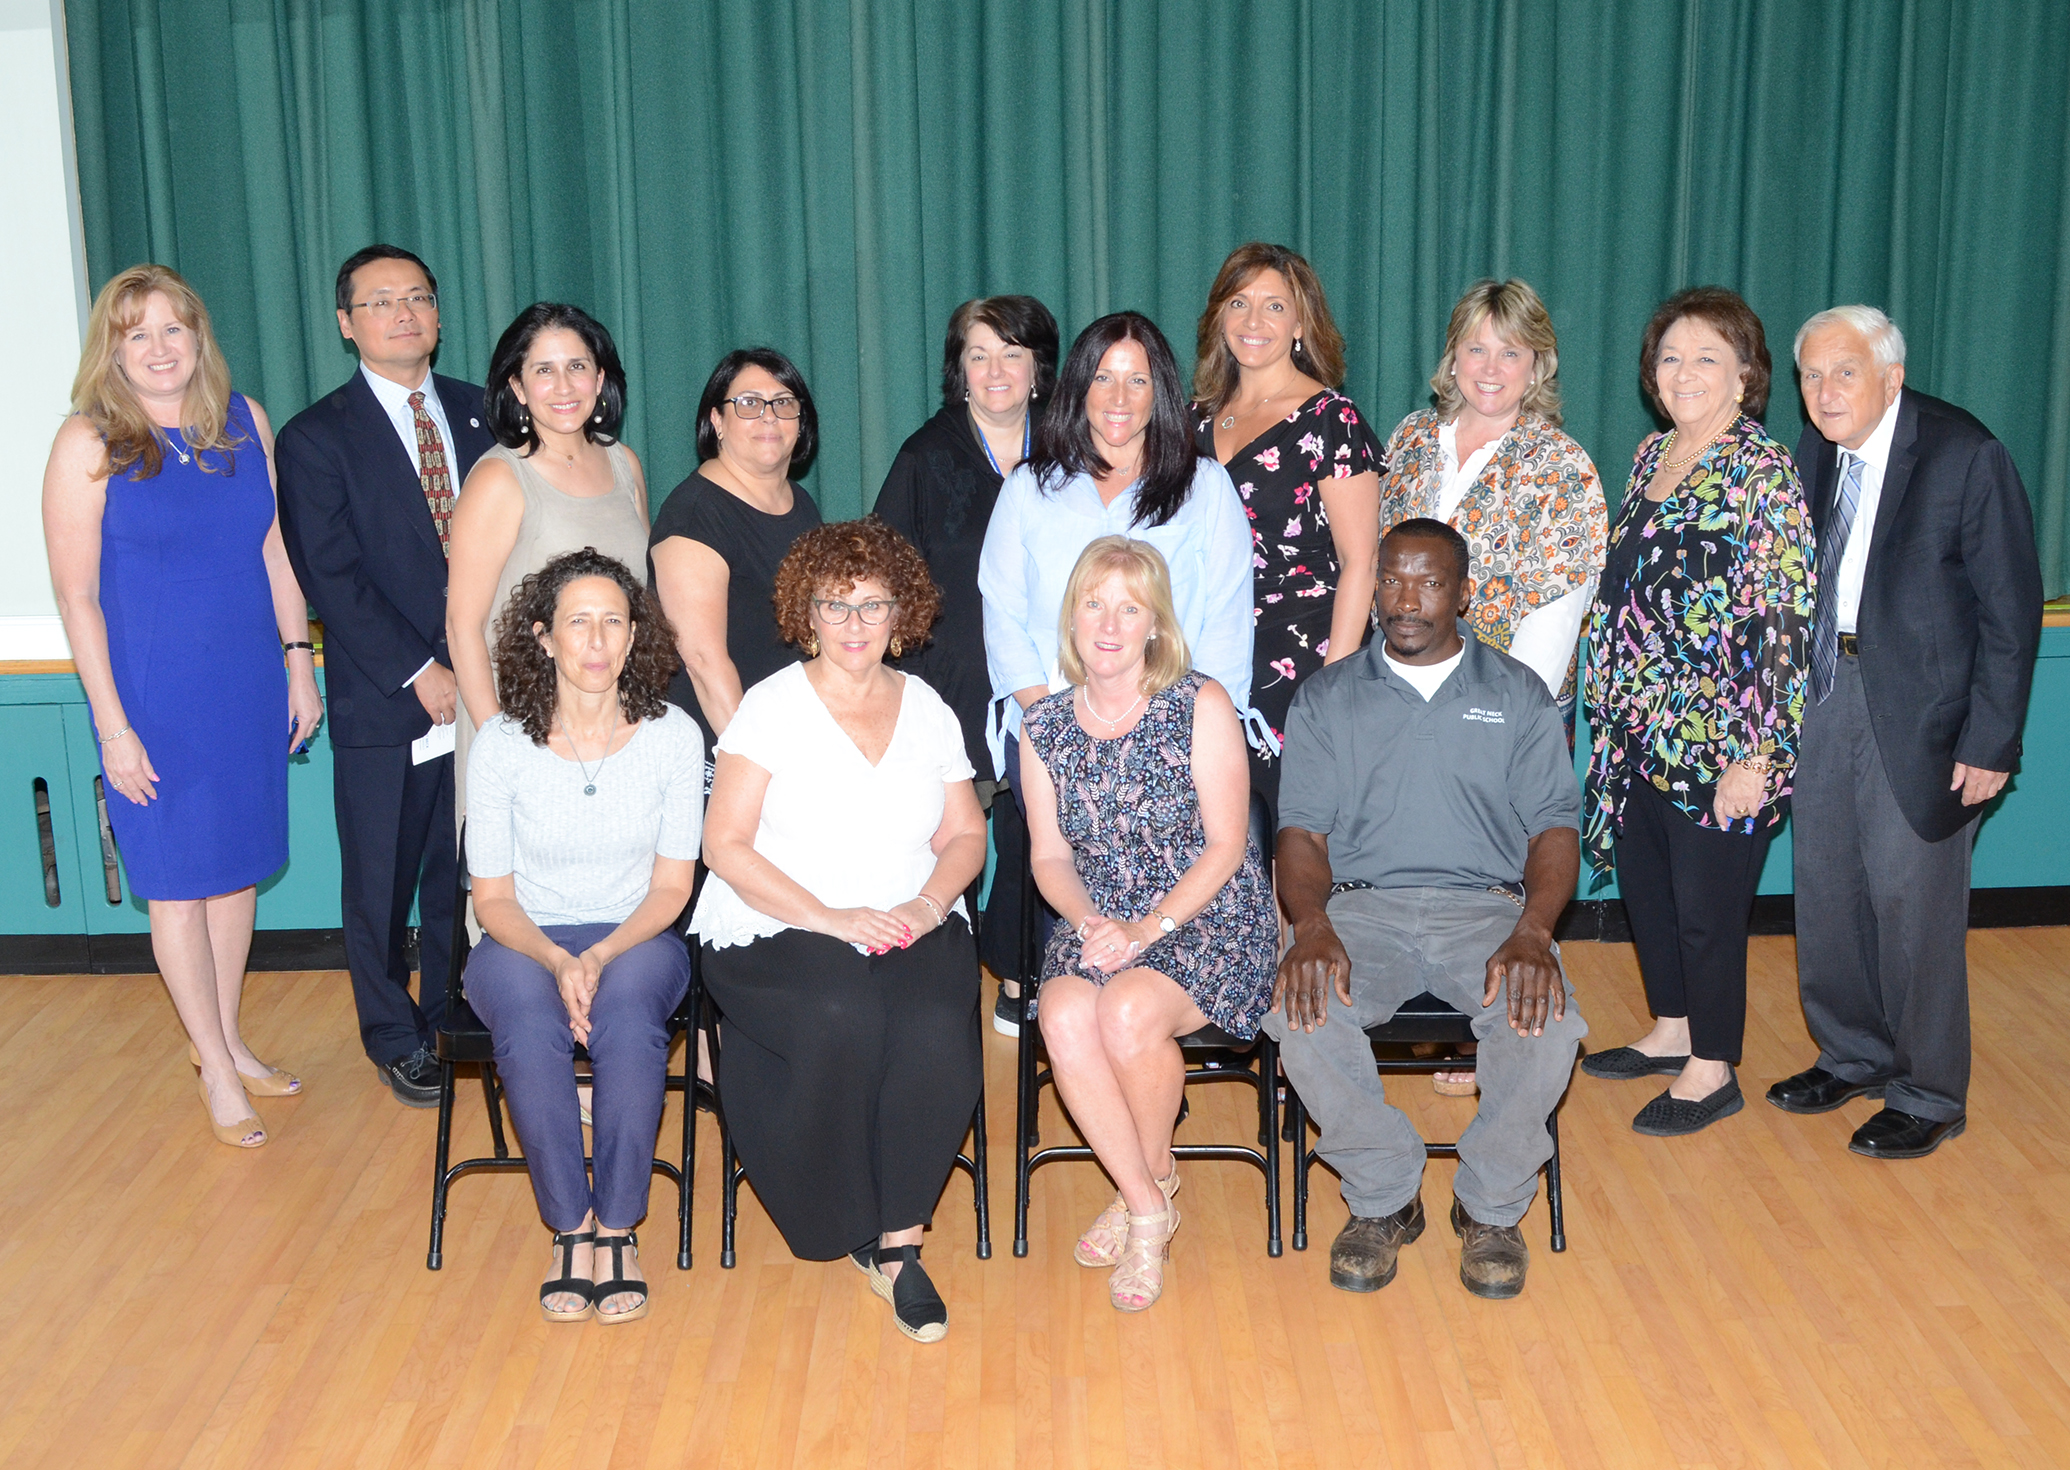 The school board and administrators recognized 25-year employees of the Great Neck Public Schools. (Photo by Irwin Mendlinger)